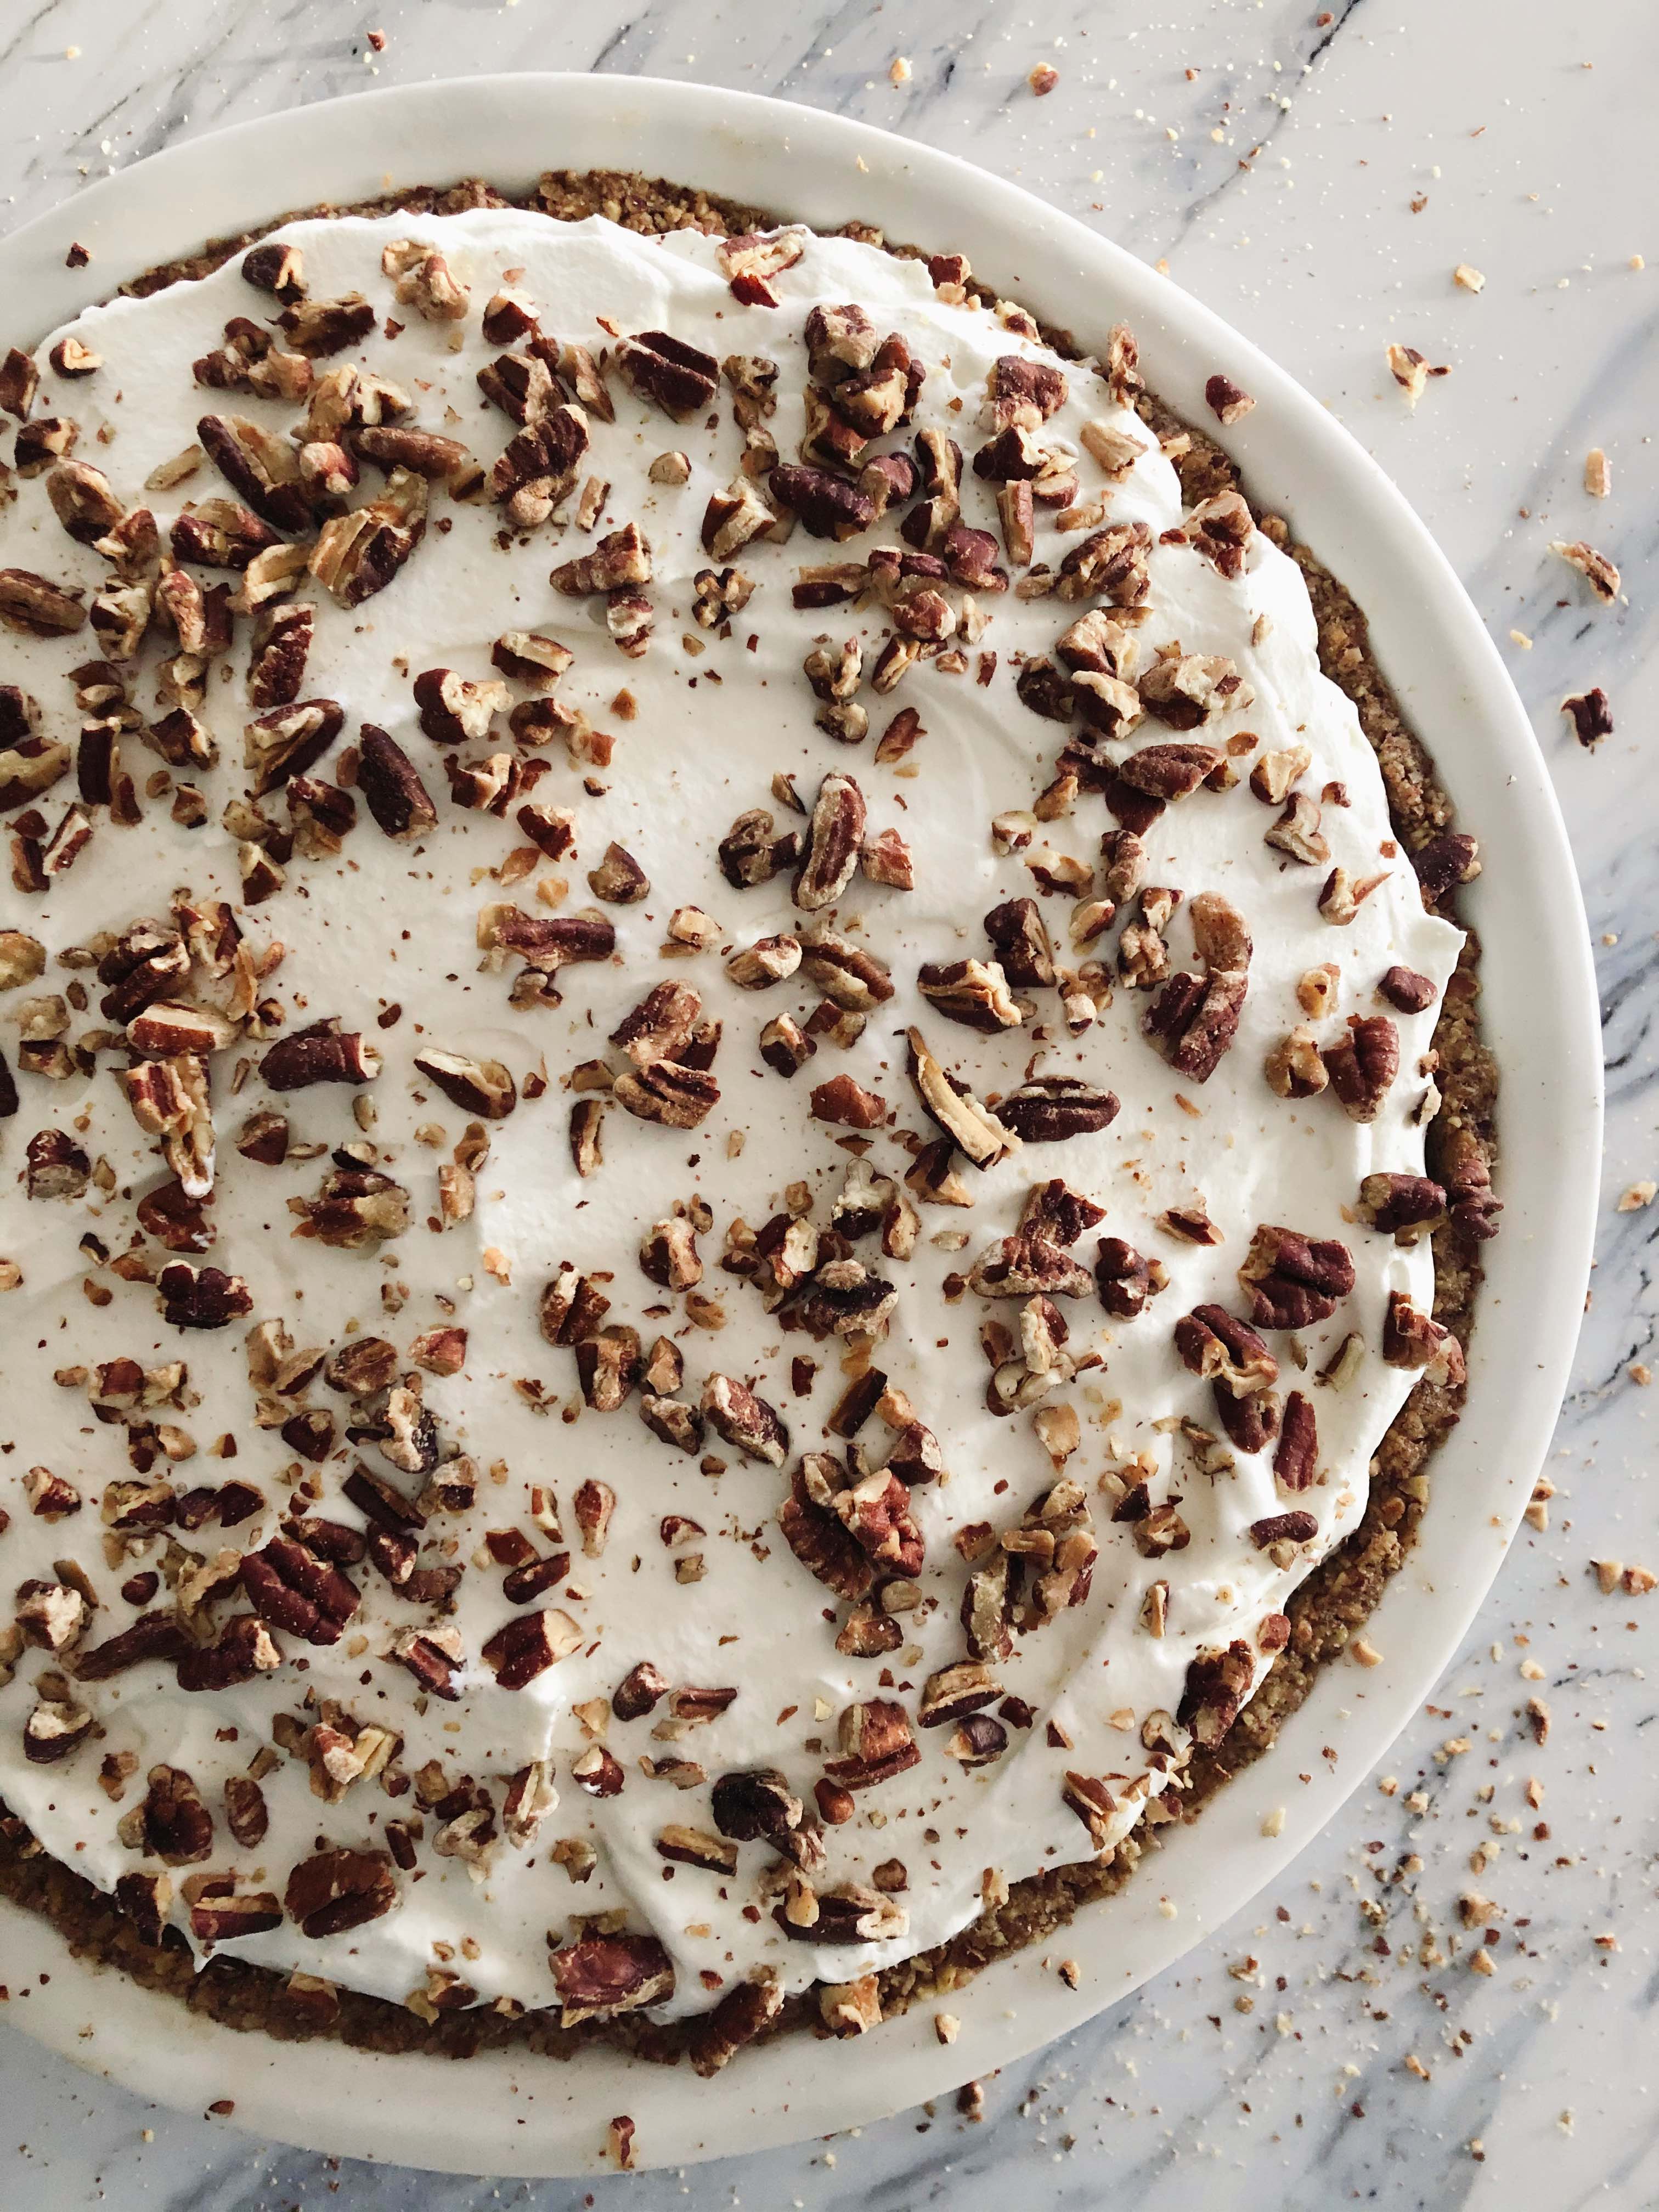 Pumpkin Pecan Torte topped with whipped cream and chopped pecans in a white pie plate on a white marble countertop